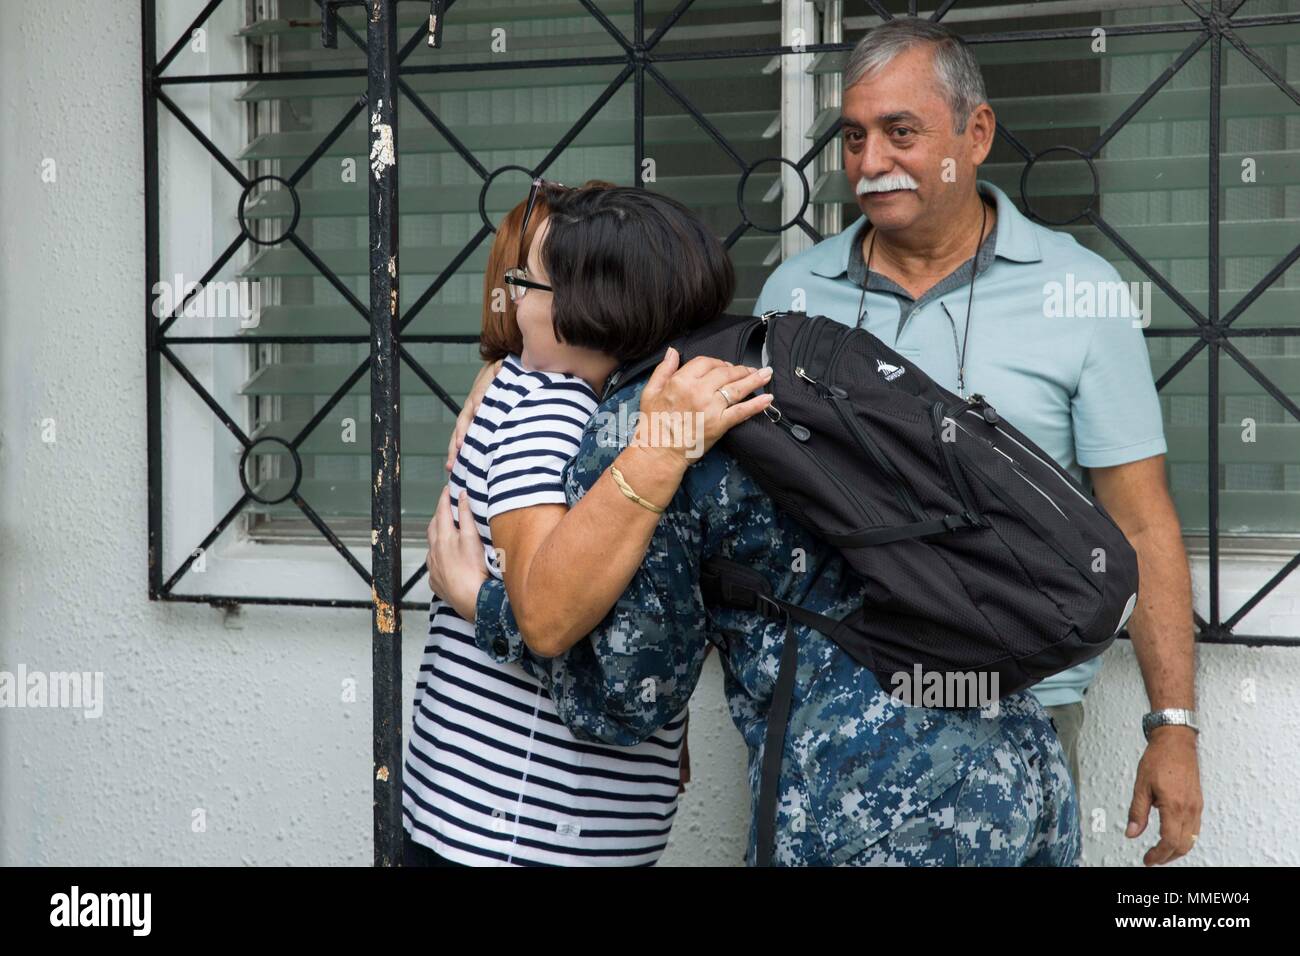 171027-N-MC499-024 BAYAMON, Puerto Rico (Oct. 27, 2017) Operations  Specialist Seaman Zabrina Adorno, assigned to the amphibious assault ship  USS Kearsarge (LHD 3), greets her uncle, Tony Hernandez, and her aunt,  Gladys Hernandez-Luna,